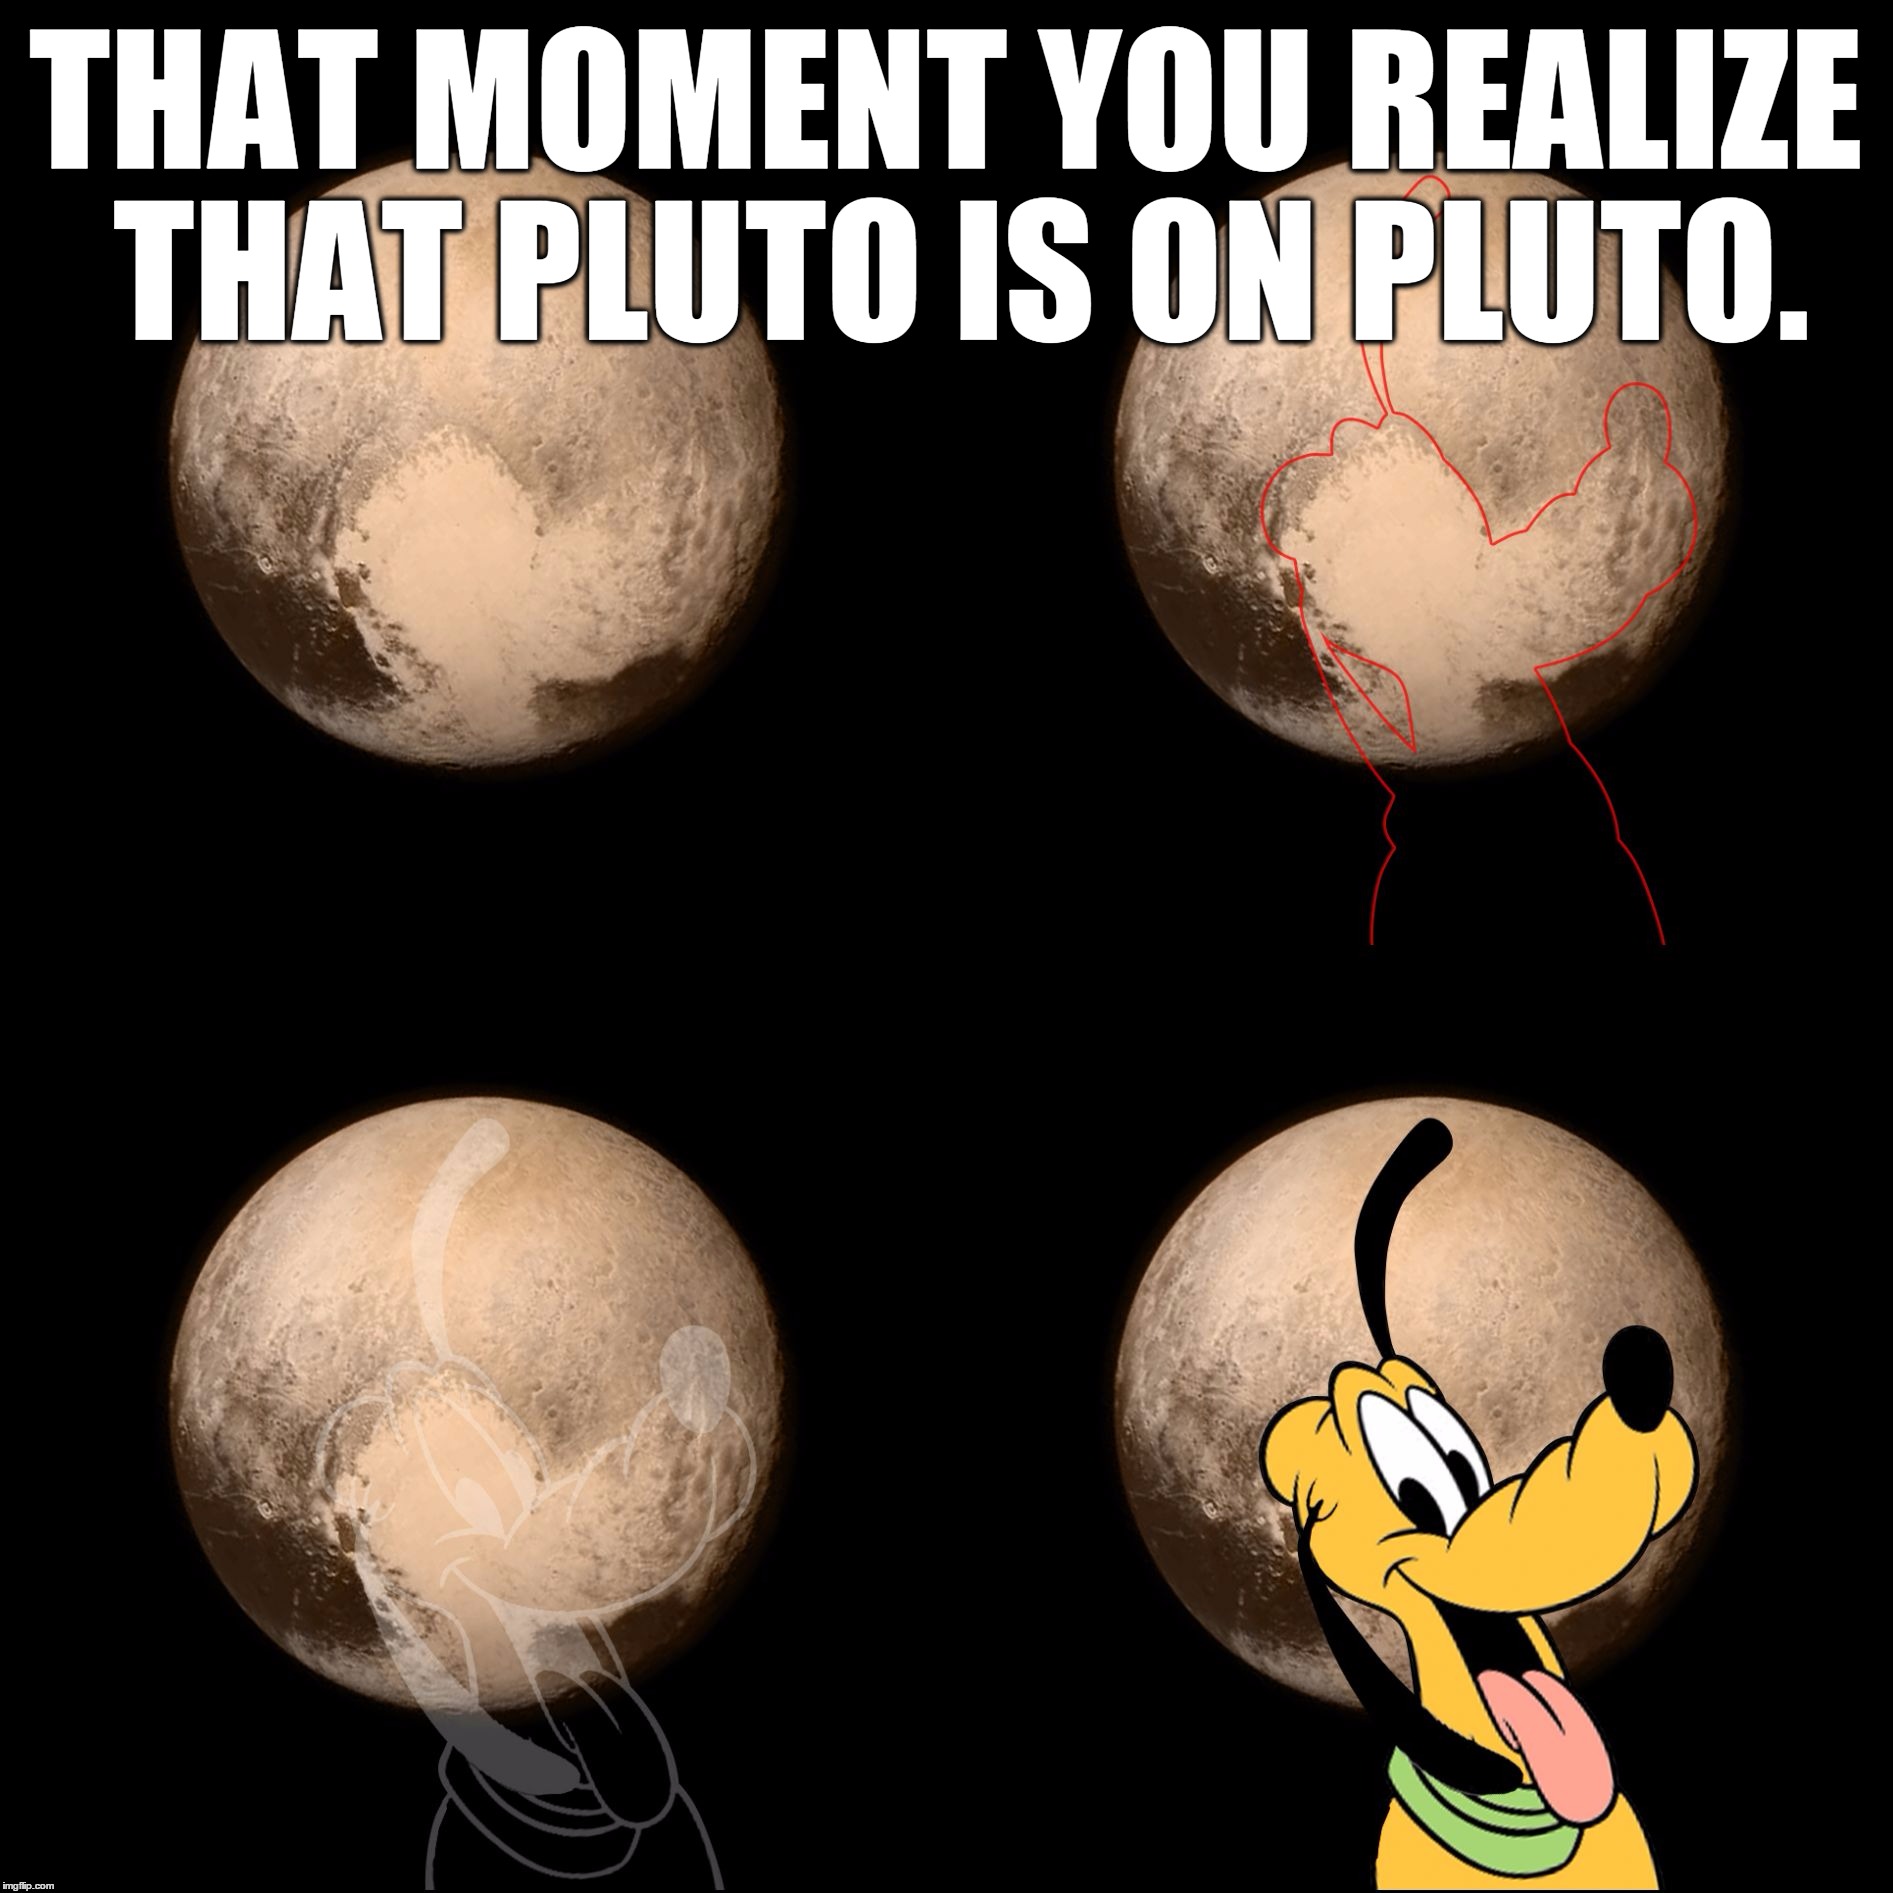 Pluto Is On Pluto! | THAT MOMENT YOU REALIZE THAT PLUTO IS ON PLUTO. | image tagged in pluto on pluto,memes,pluto,disney,space,funny | made w/ Imgflip meme maker